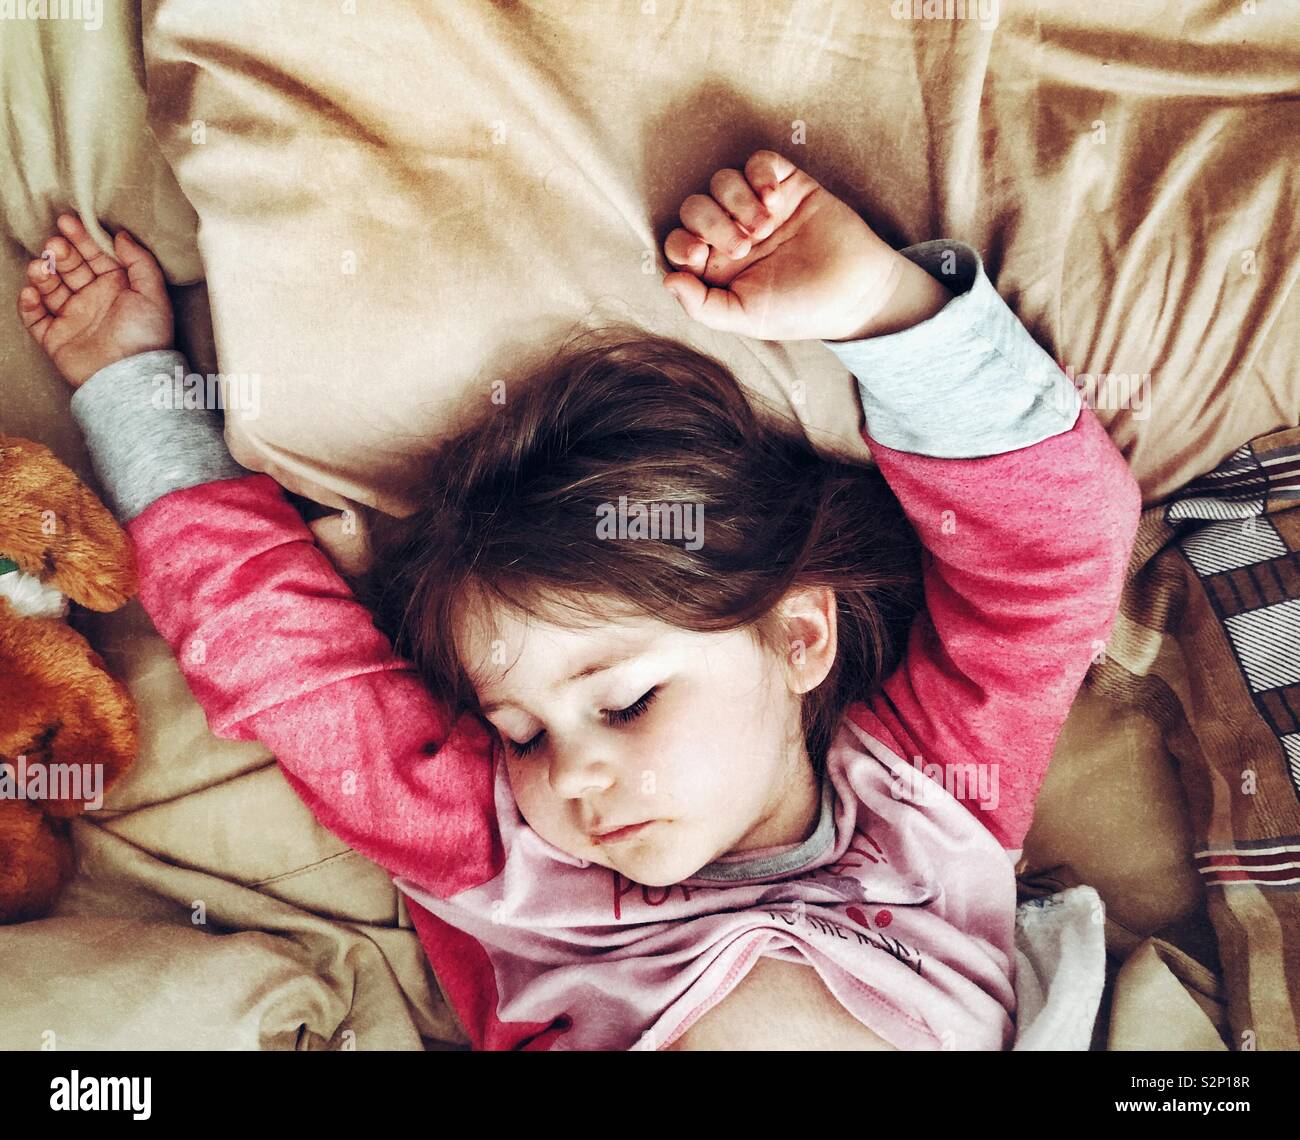 Young girl sleeping with arms up Stock Photo